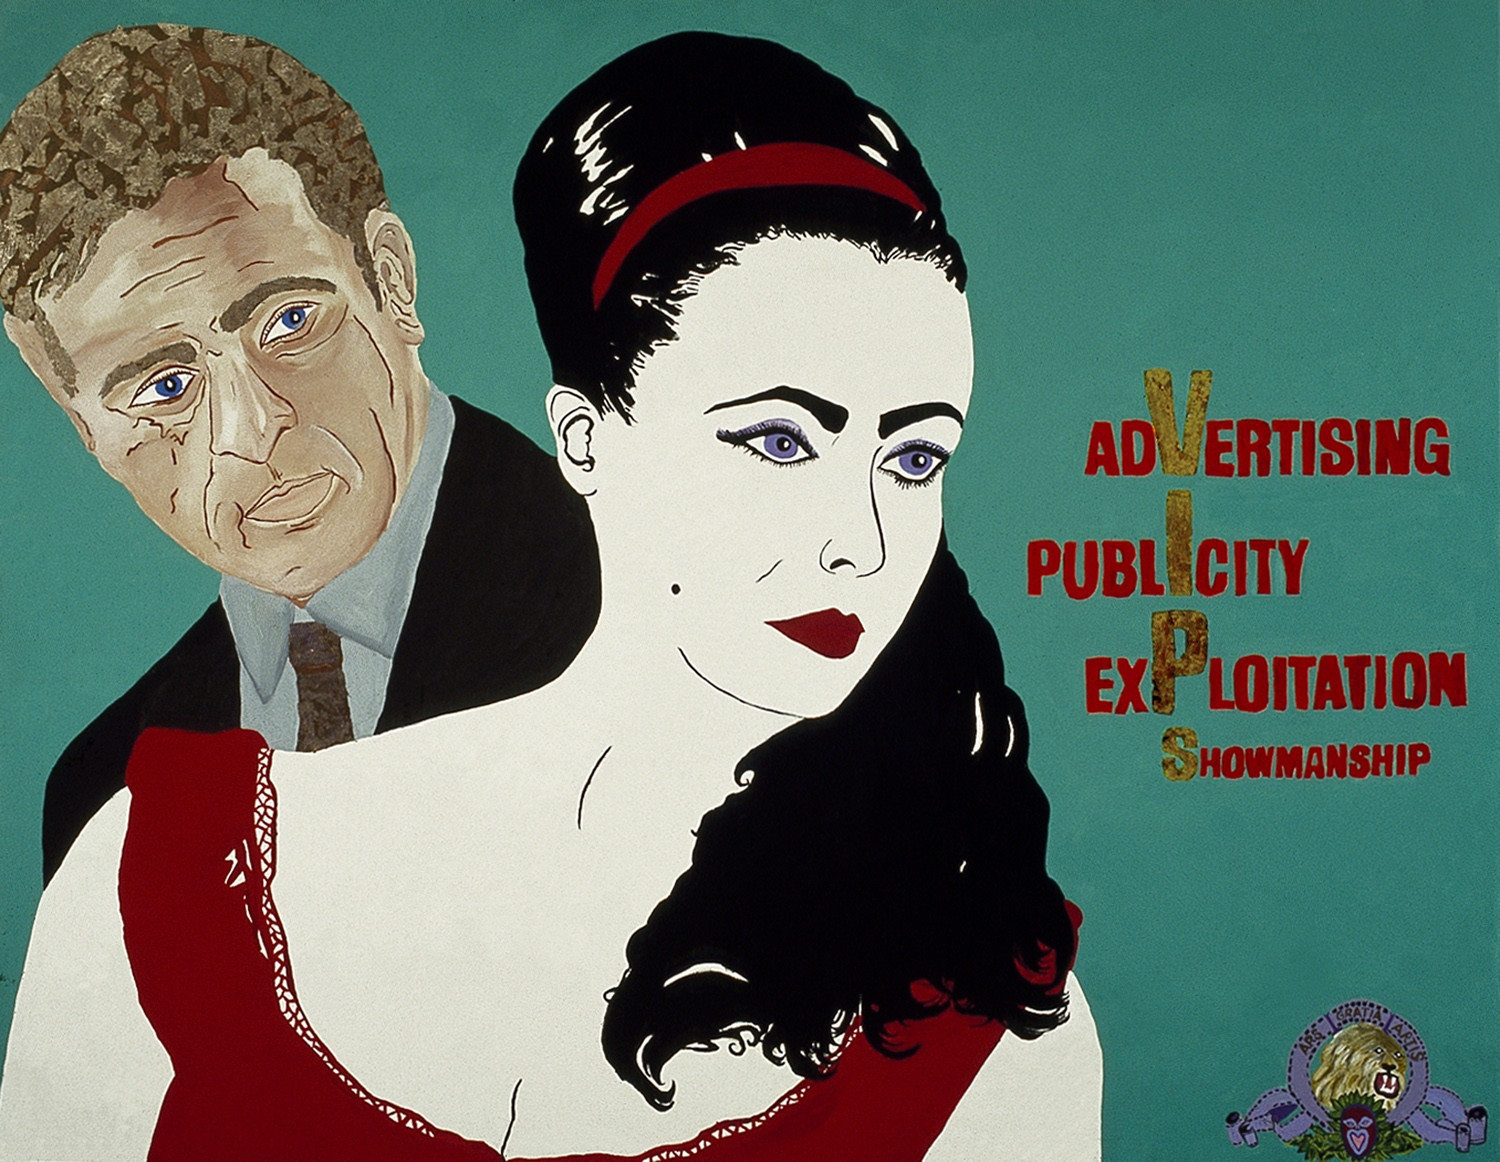 The Artworld: Advertising, Publicity, Exploitation, Showmanship: from the Liz Taylor Series (The VIPs)